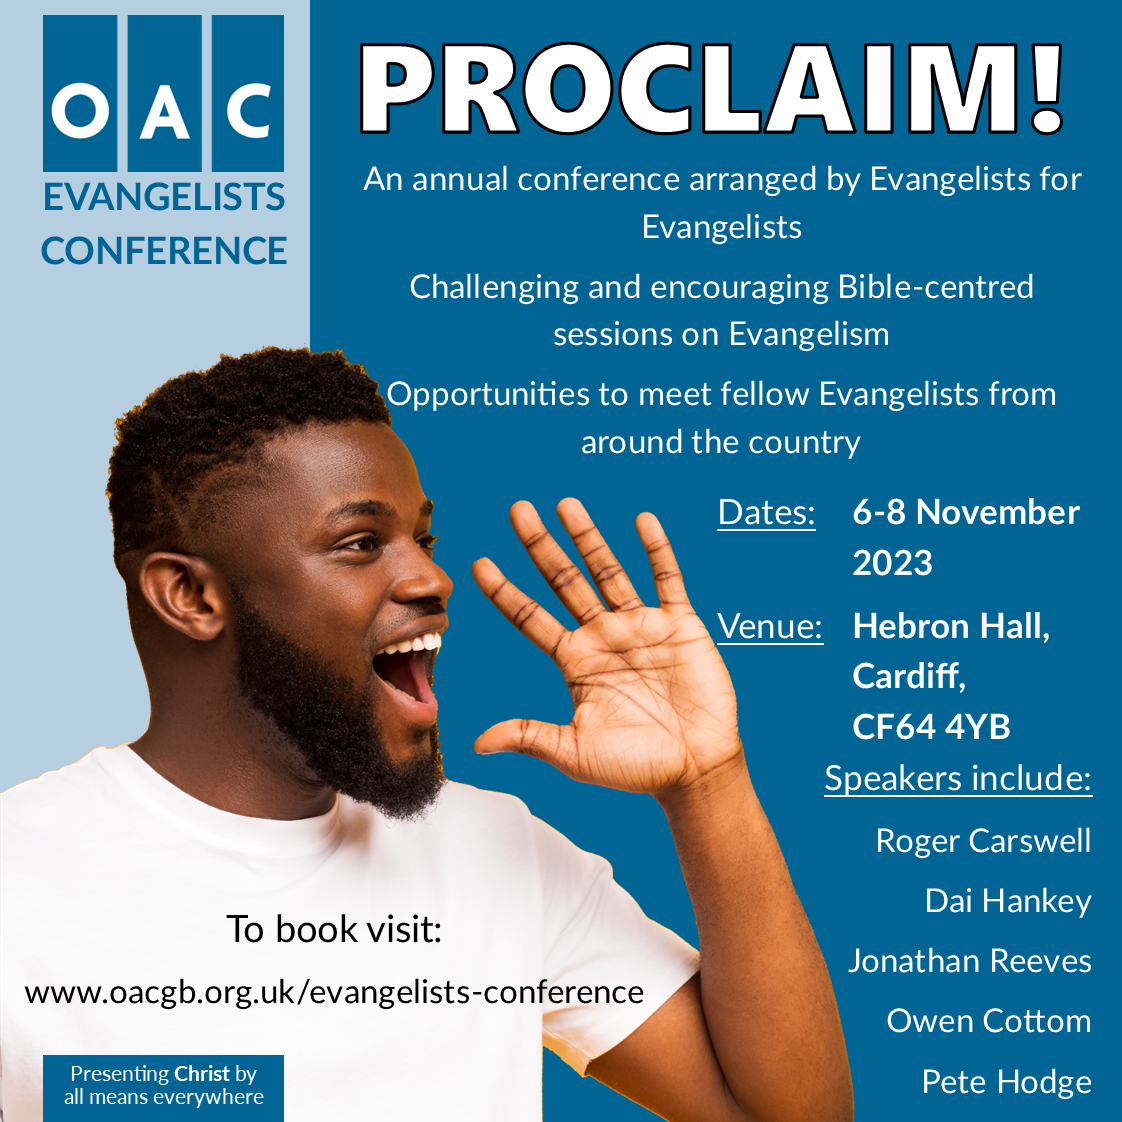 Advertisement for the OAC Evangelists Conference 2023